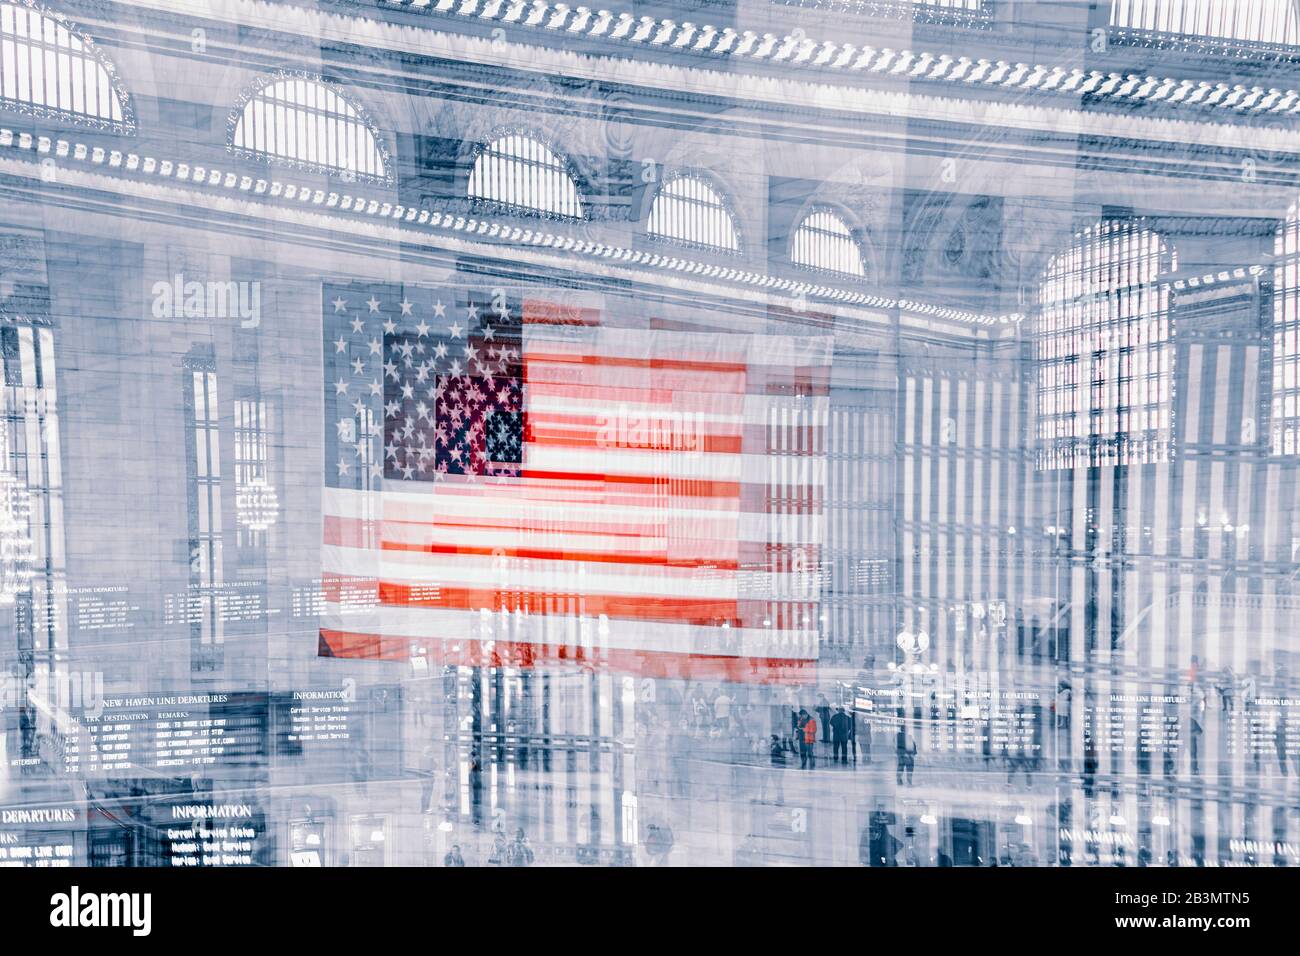 American flag in Main Concourse at Grand Central Terminal, New York City, New York State, United States of America.  The Terminal, opened in 1913, is Stock Photo